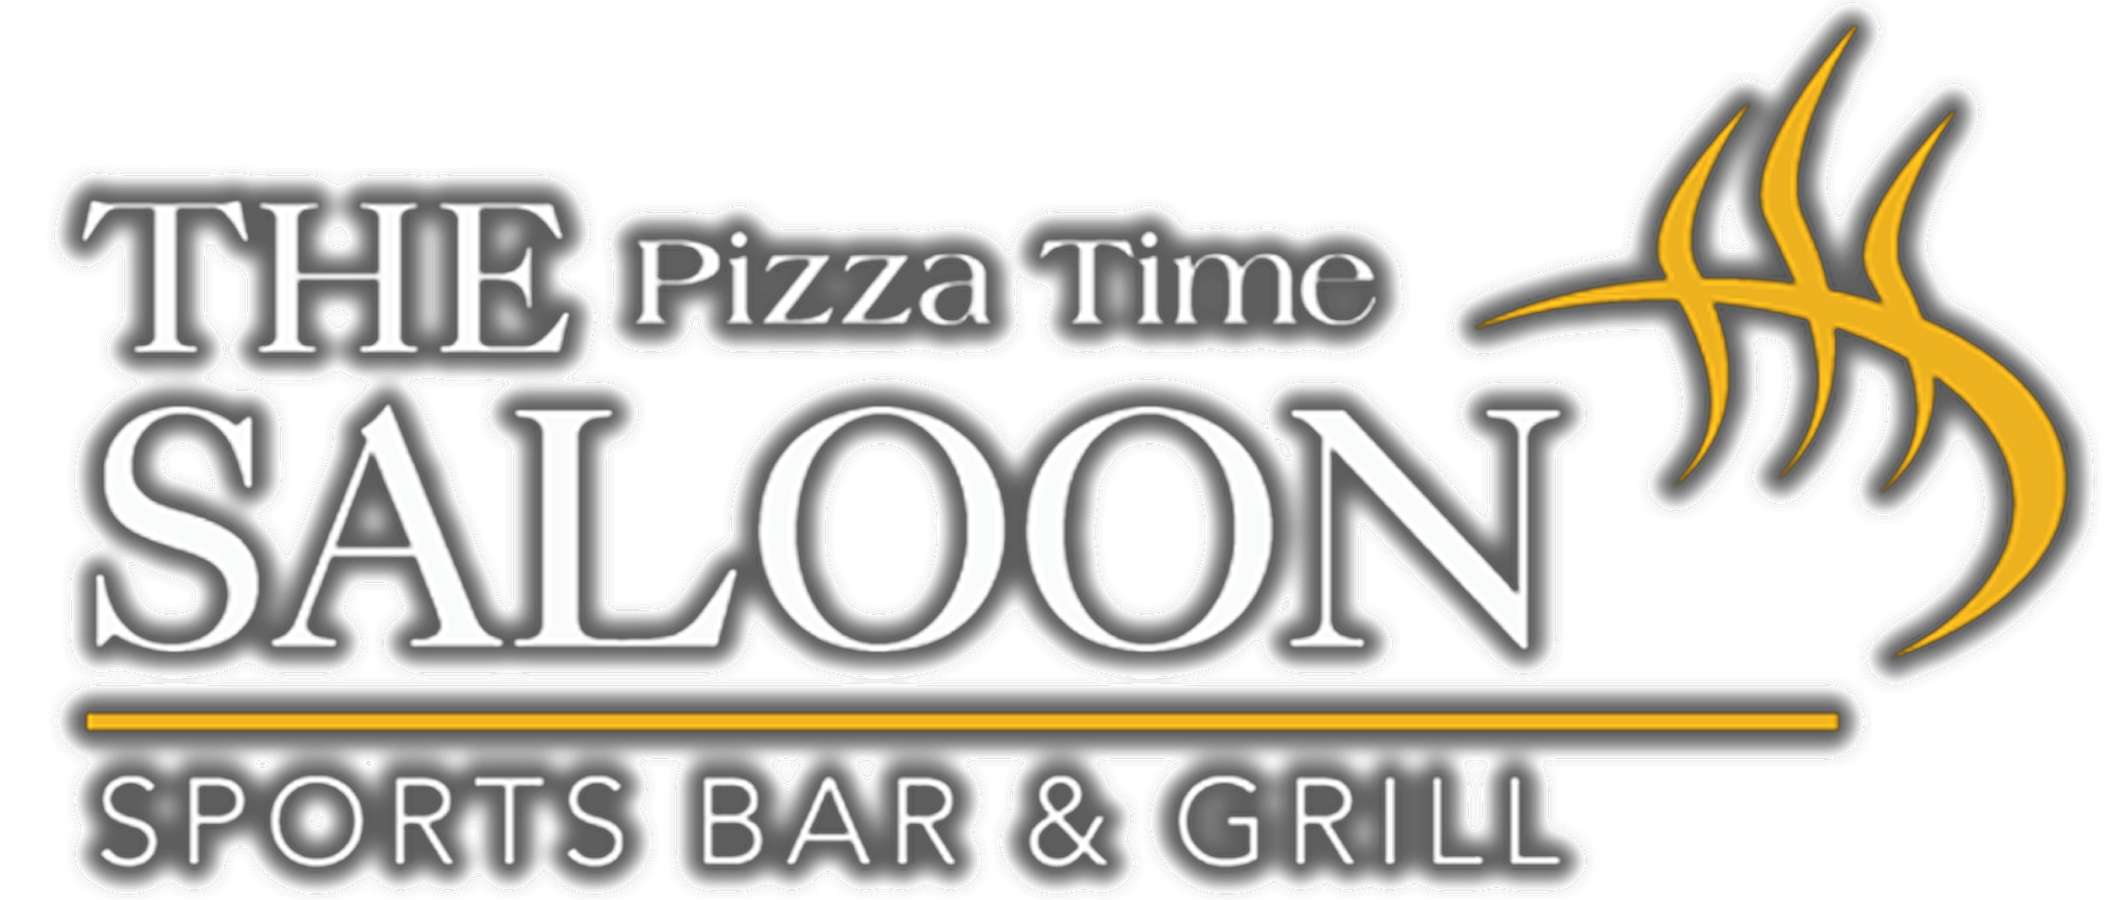 The pizza time saloon sports bar and grill logo.